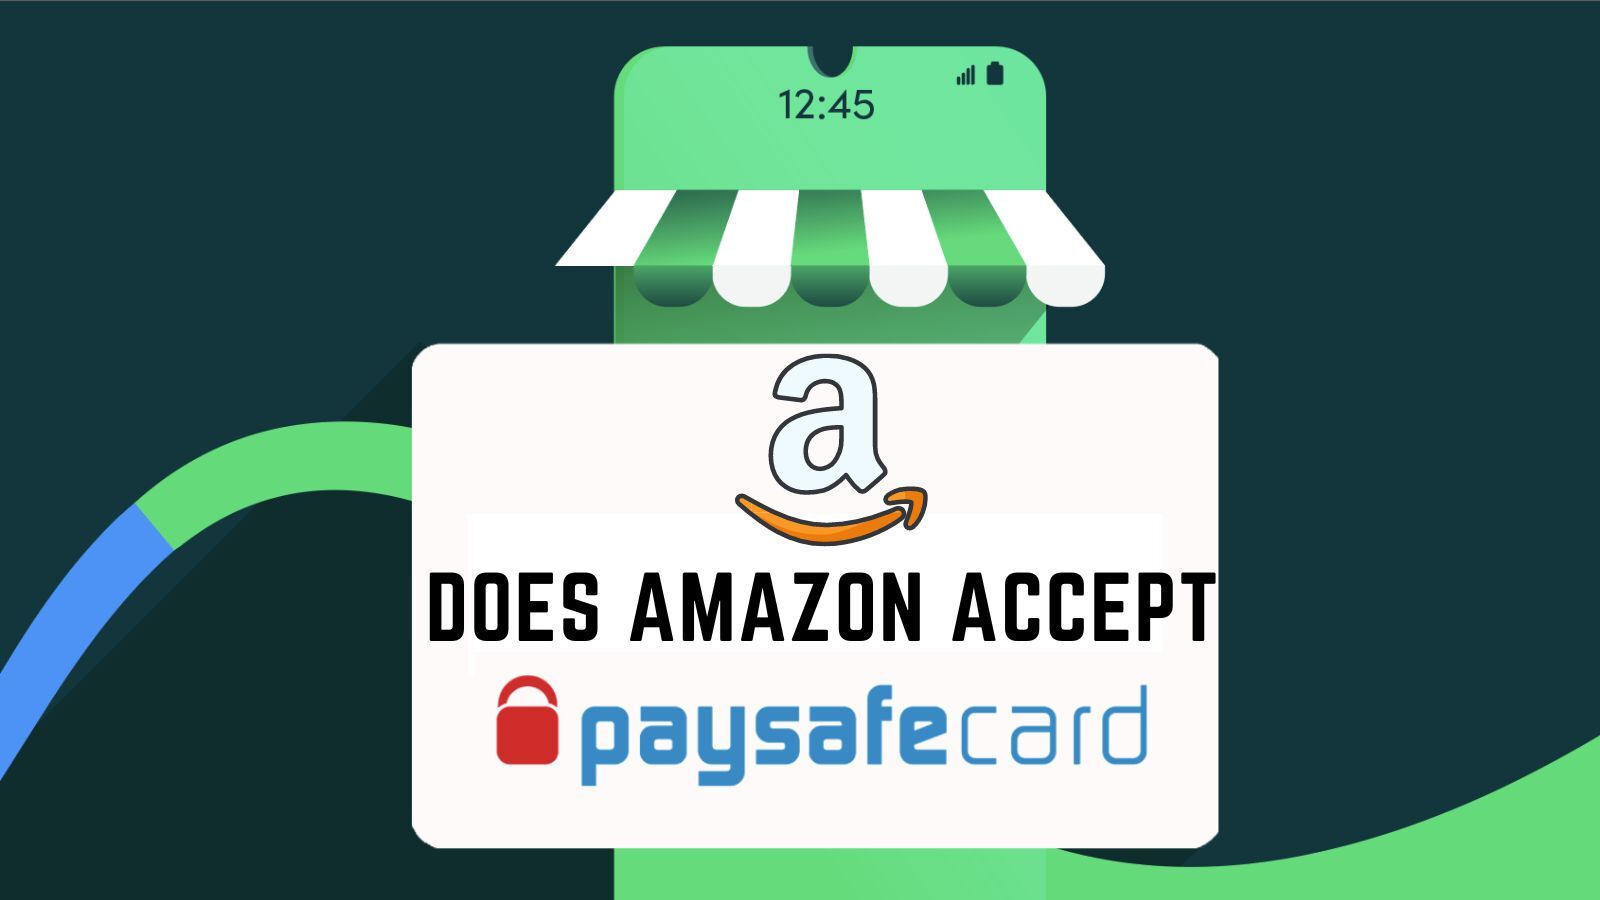  Does Amazon Accept Paysafecard? (A Full Guide)